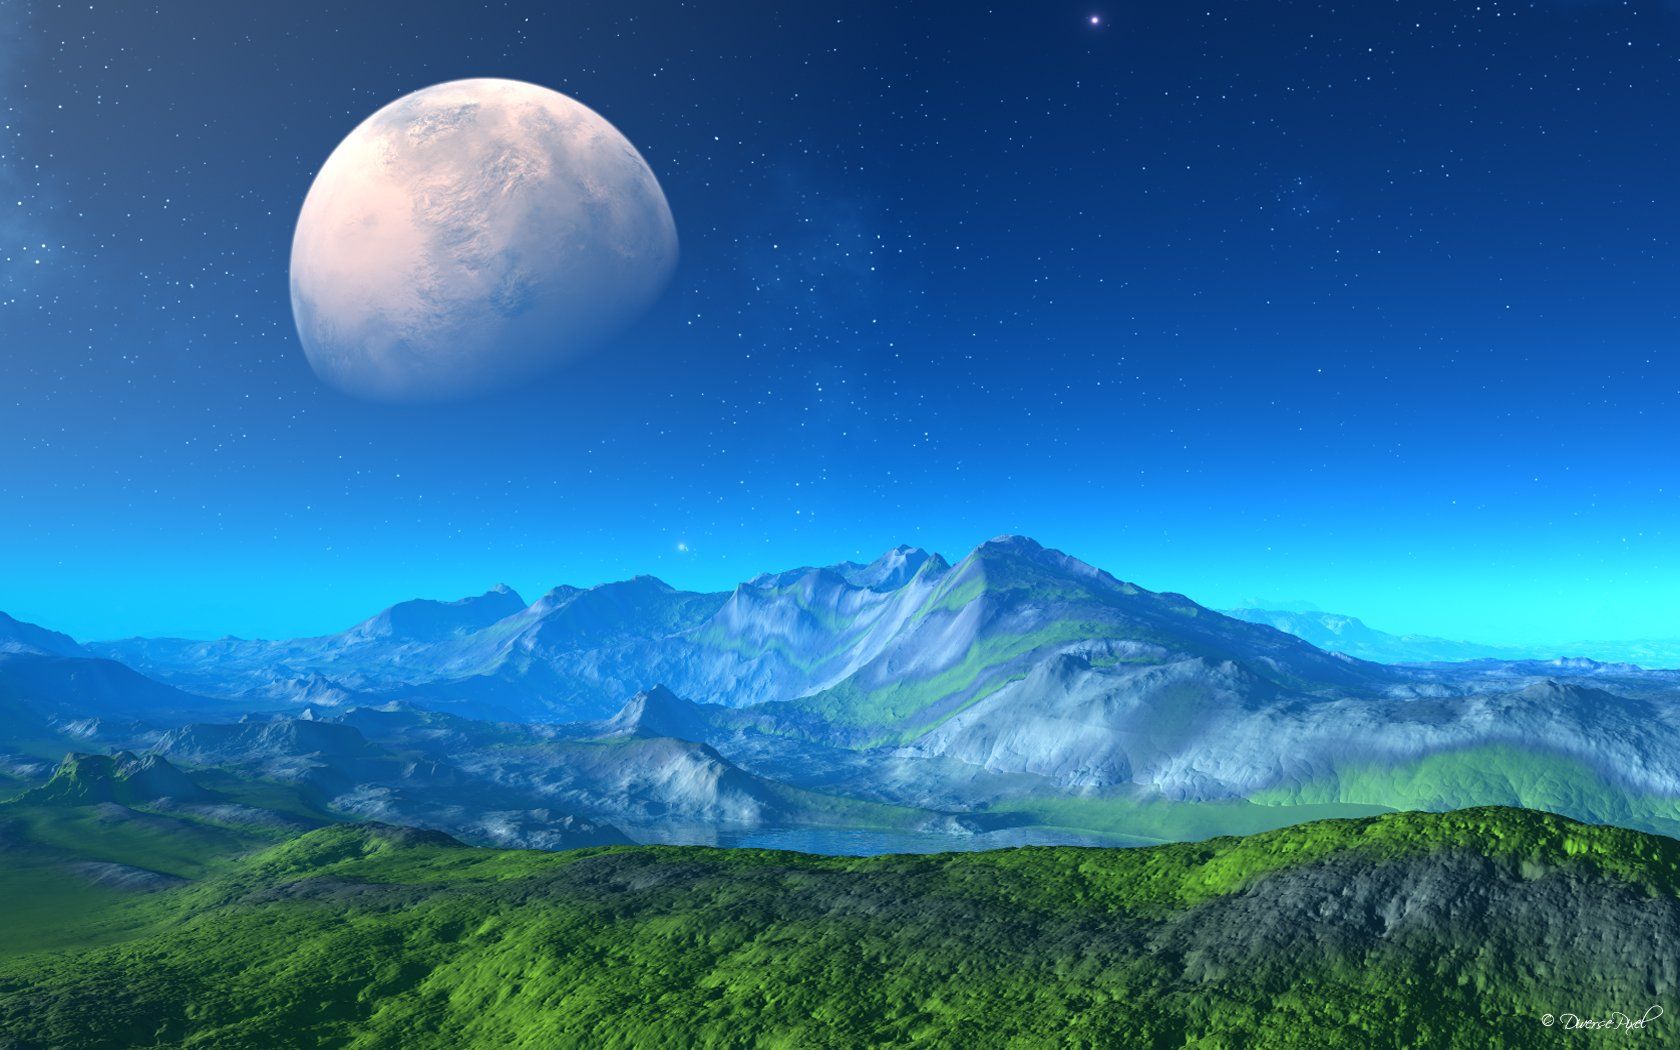 planet surface background